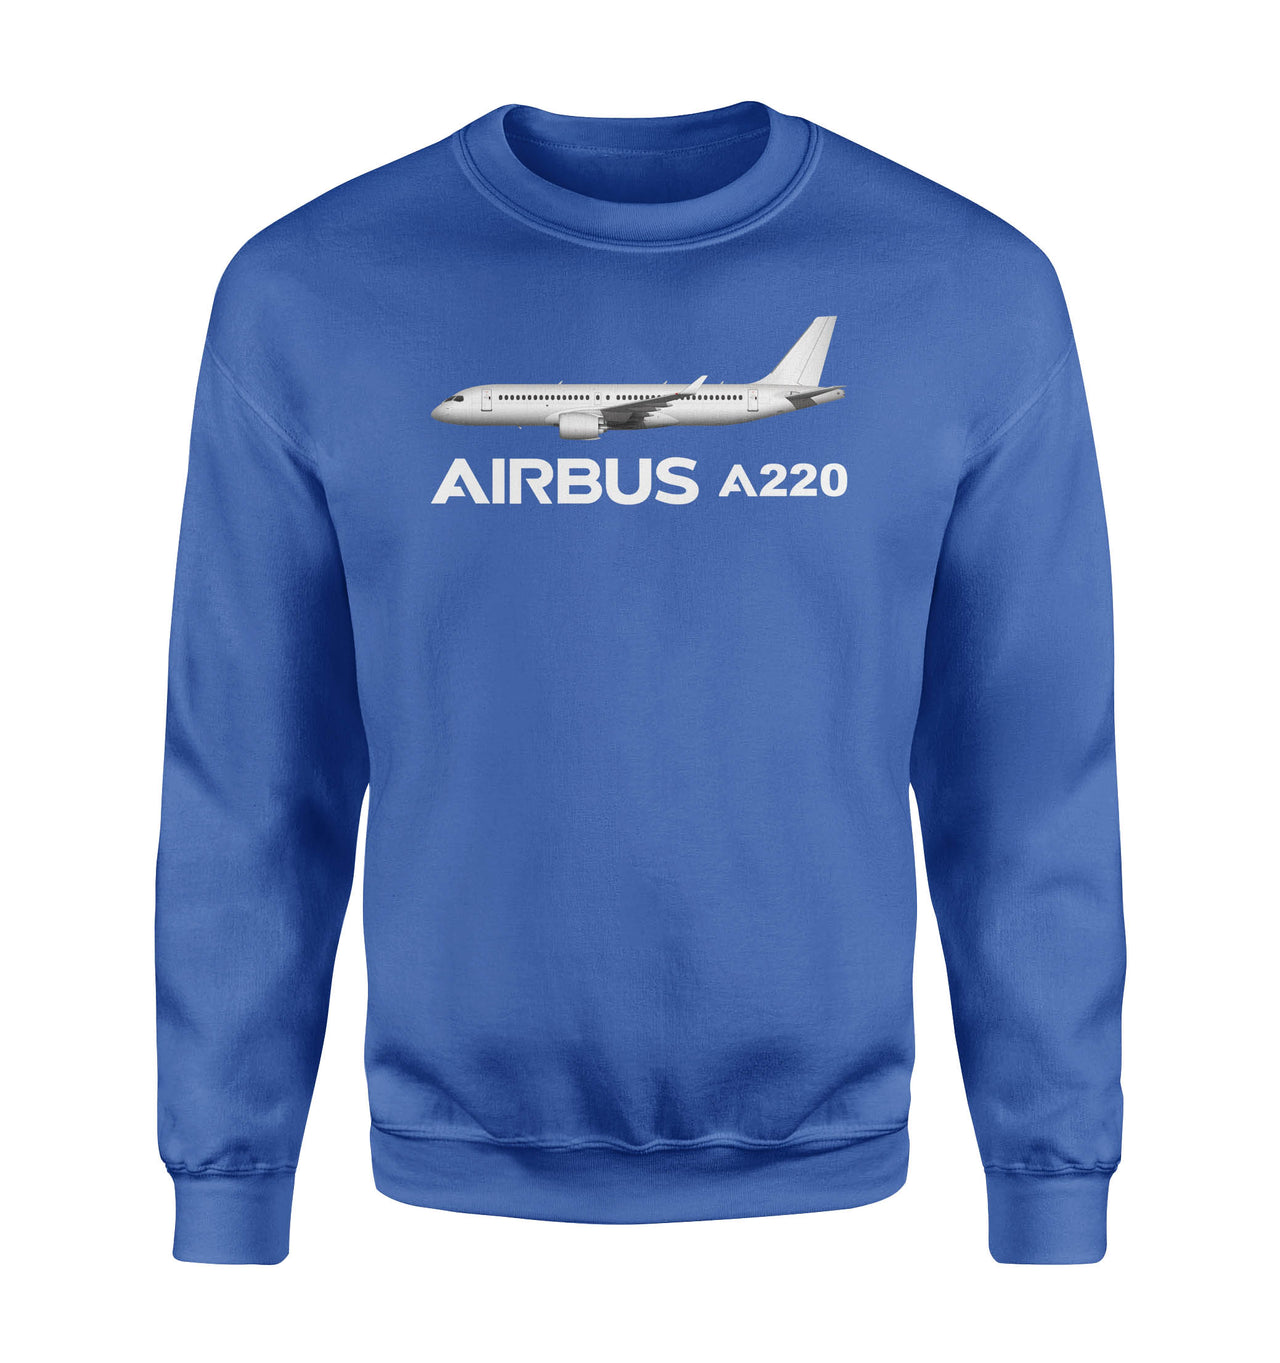 The Airbus A220 Designed Sweatshirts